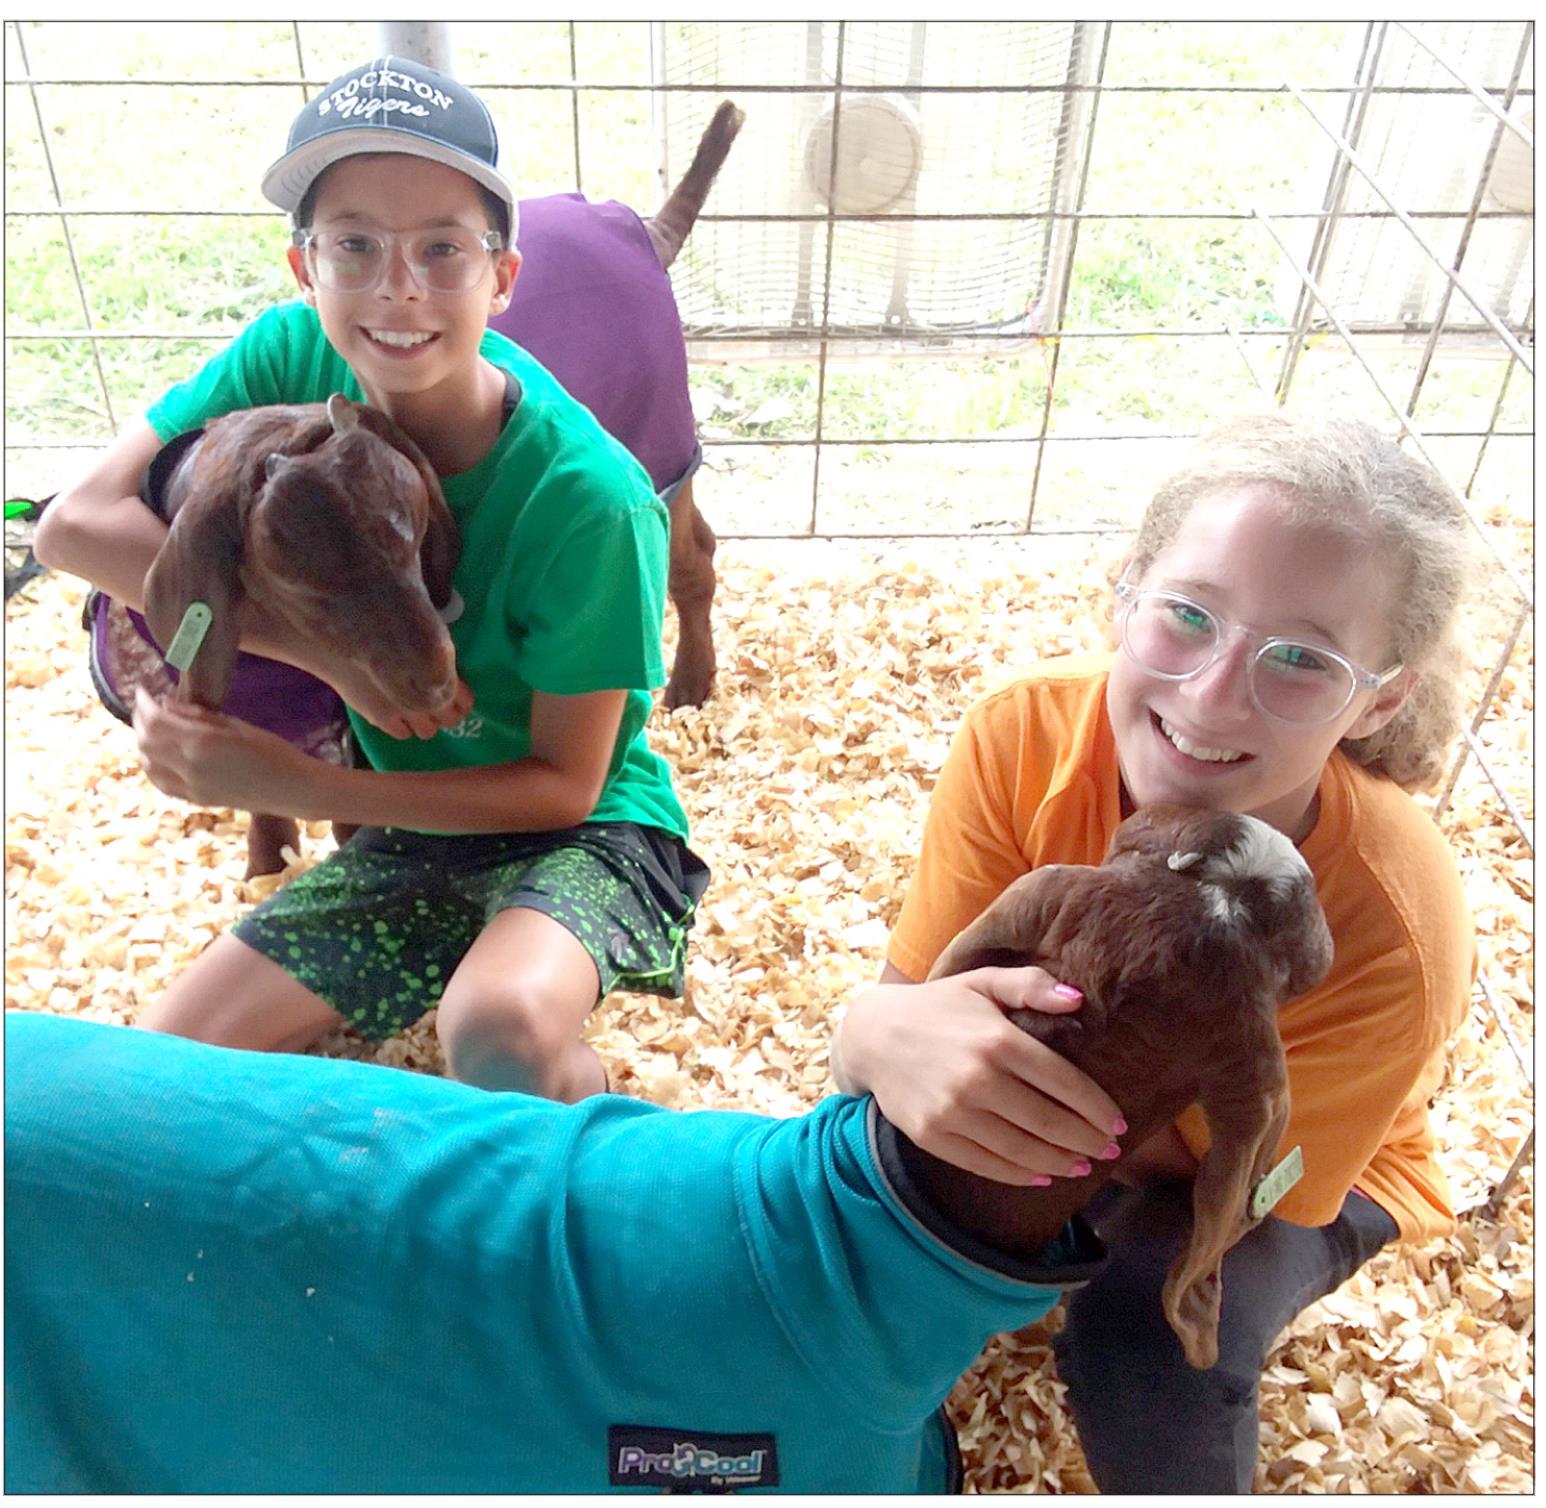 CAROLINA (LEFT) AND TEMPRANCE (RIGHT) NORTHUP show off their goats Biscuit and Gillmore at this year’s Rooks County 4-H Fair. They are members of Star 4-H.